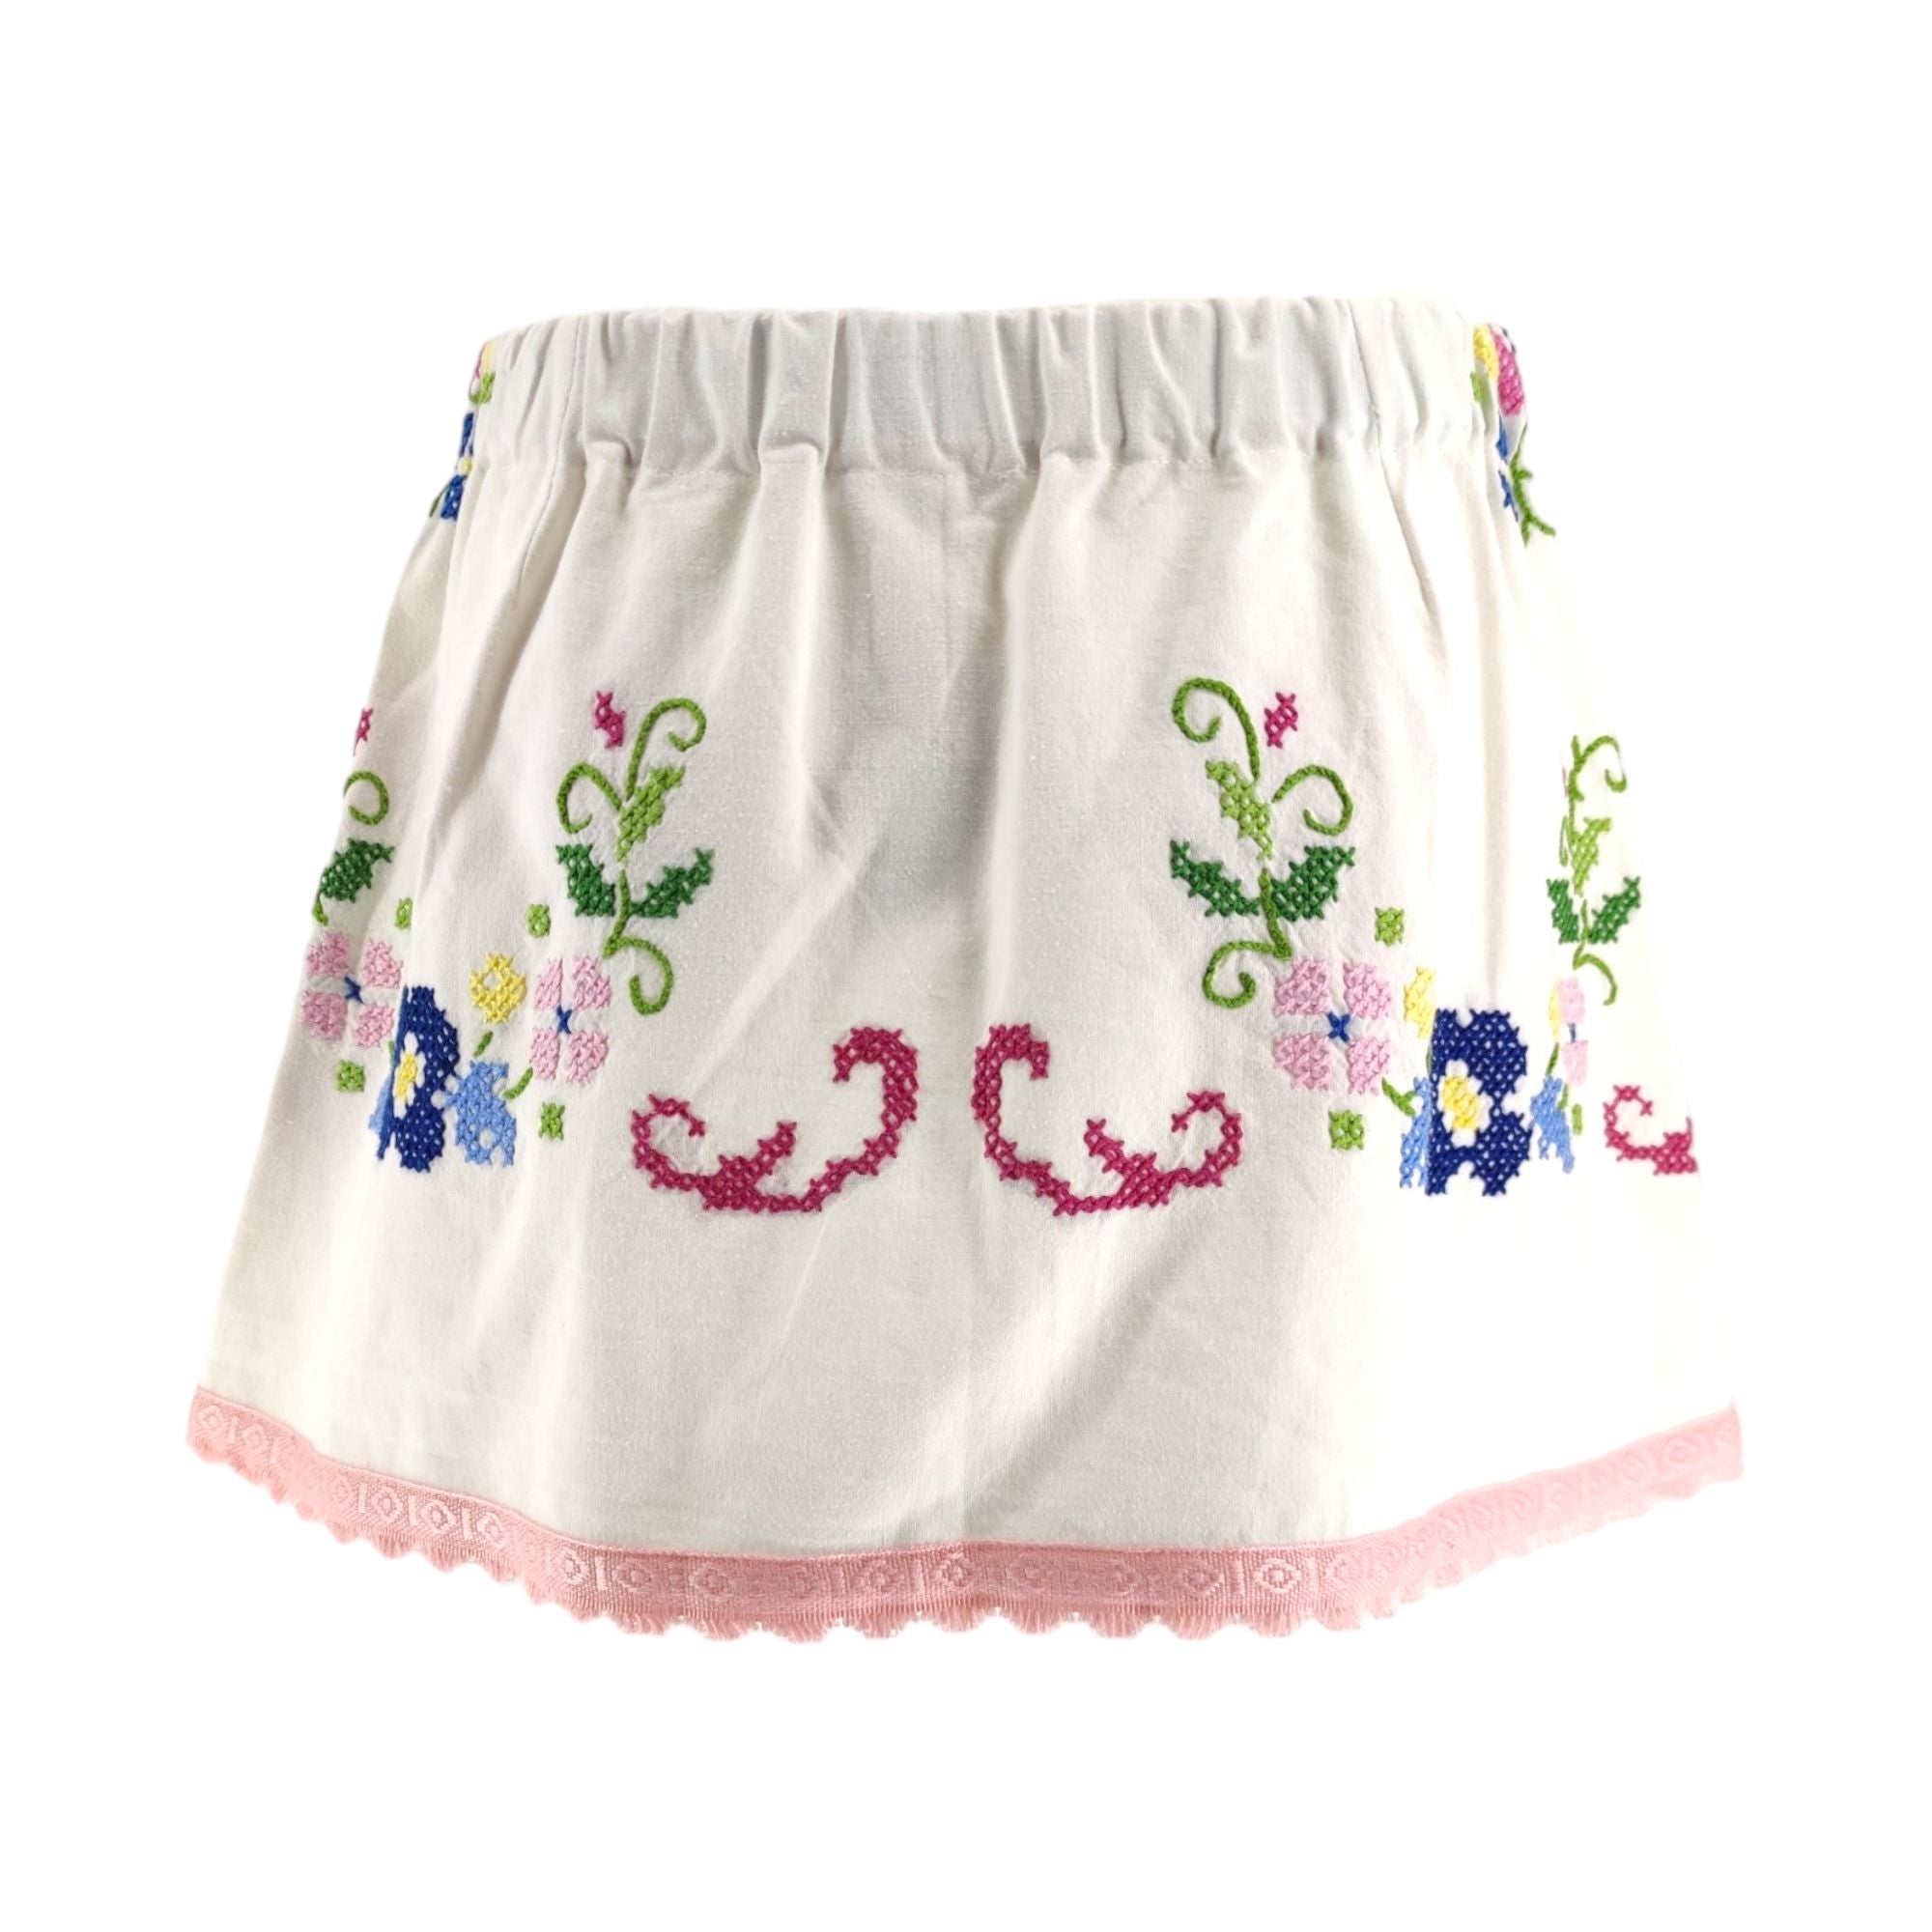 Women's Embroidery Skirt White/Pink/Blue 